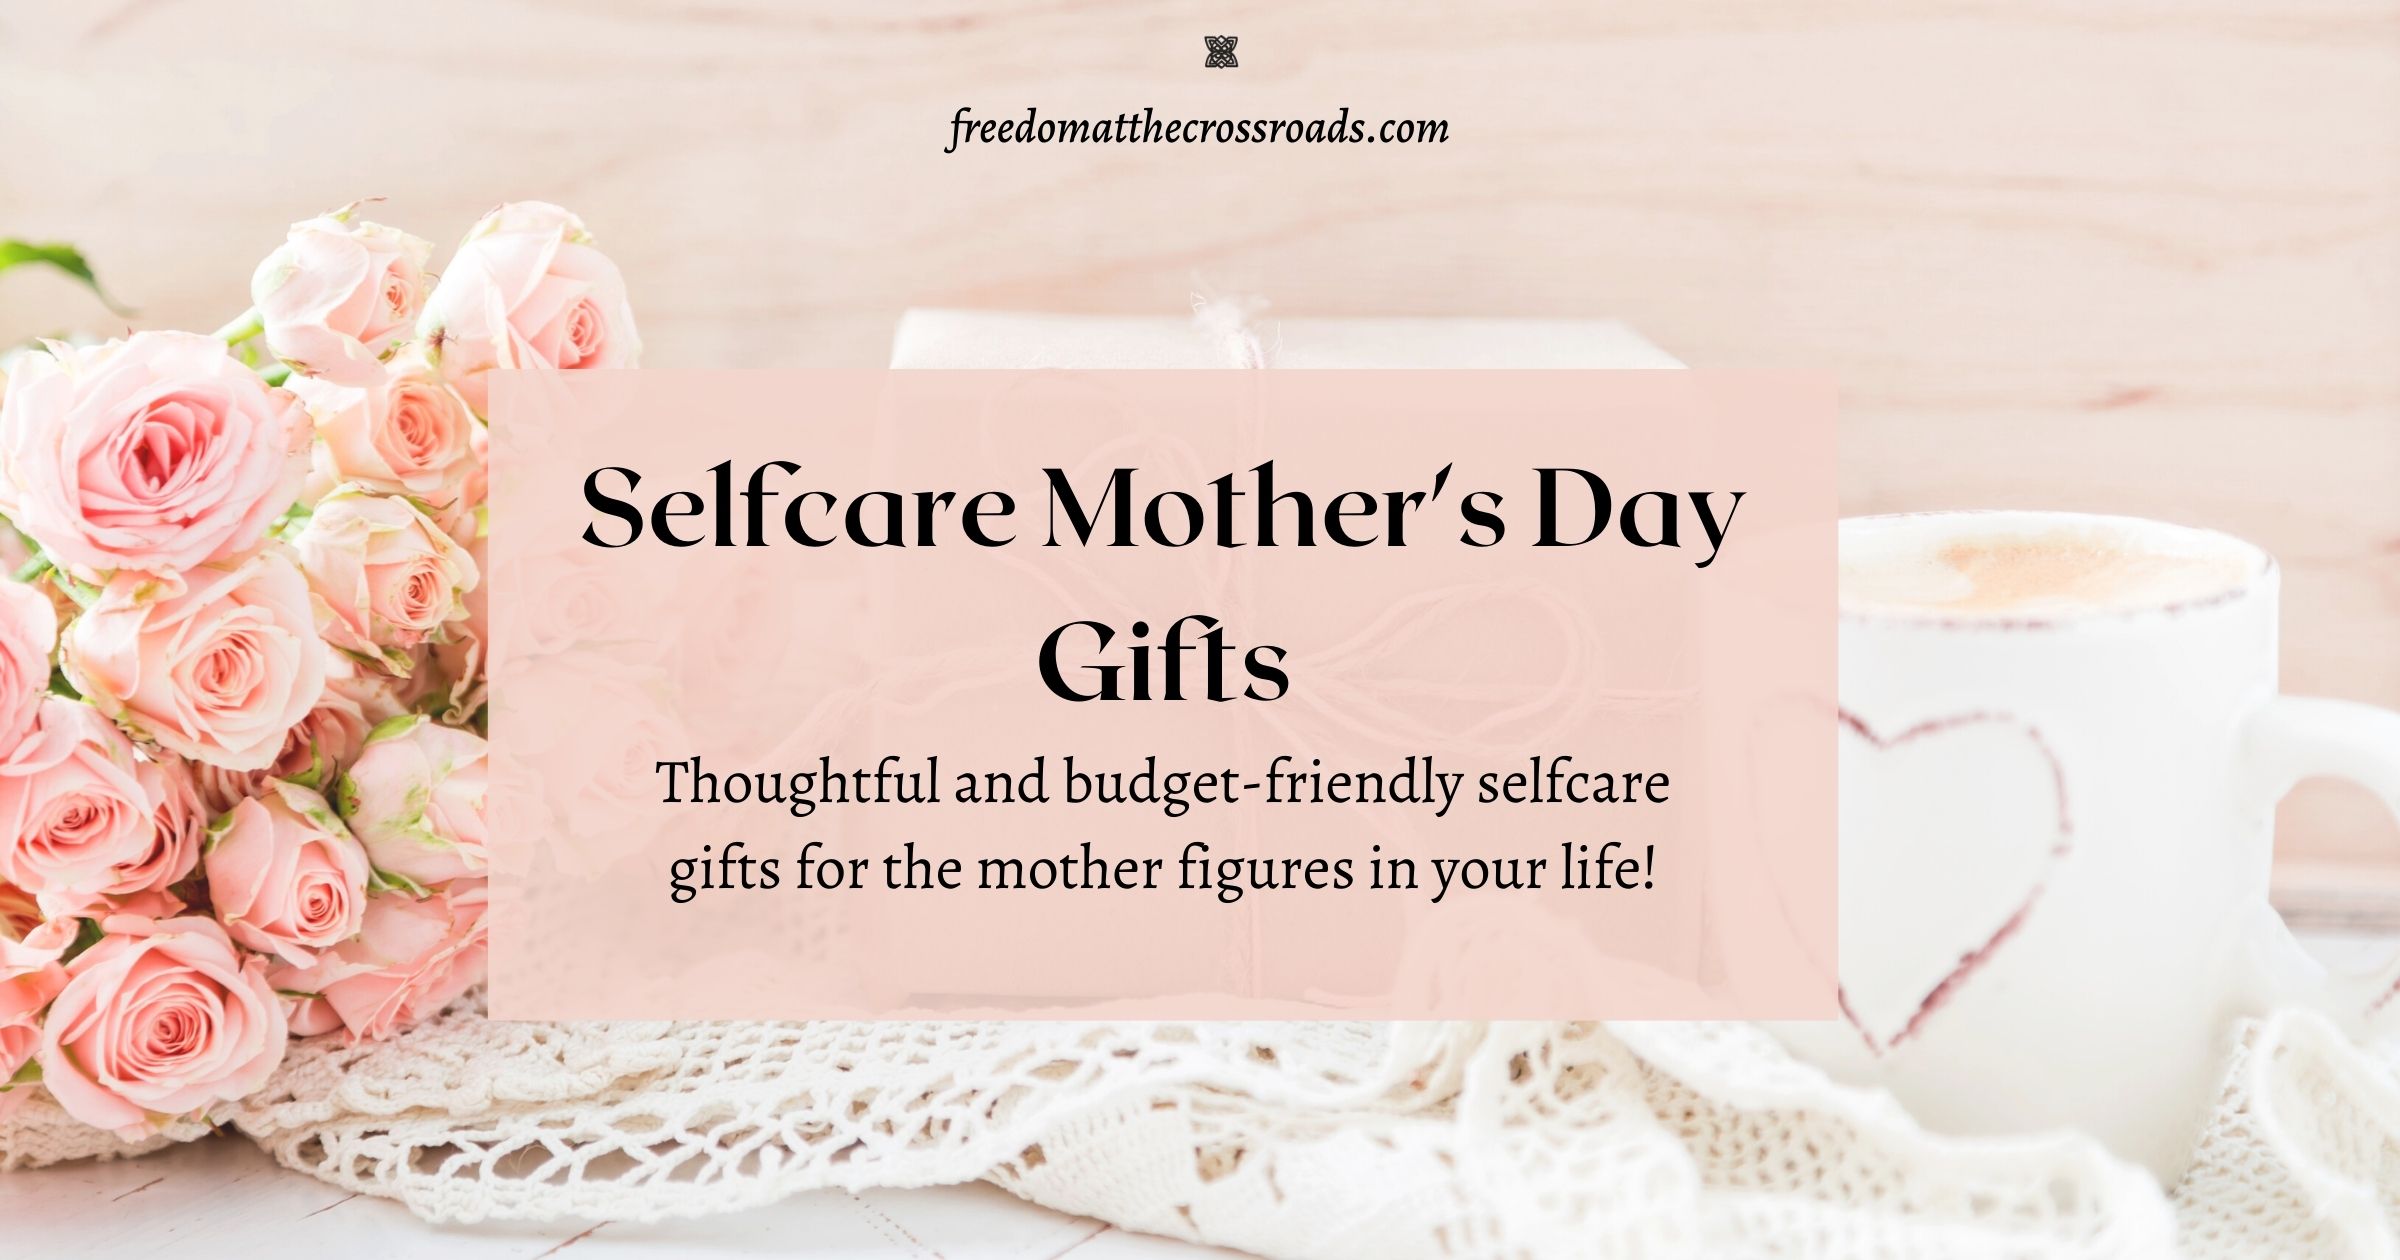 selfcare mother's day gifts blog post feature image